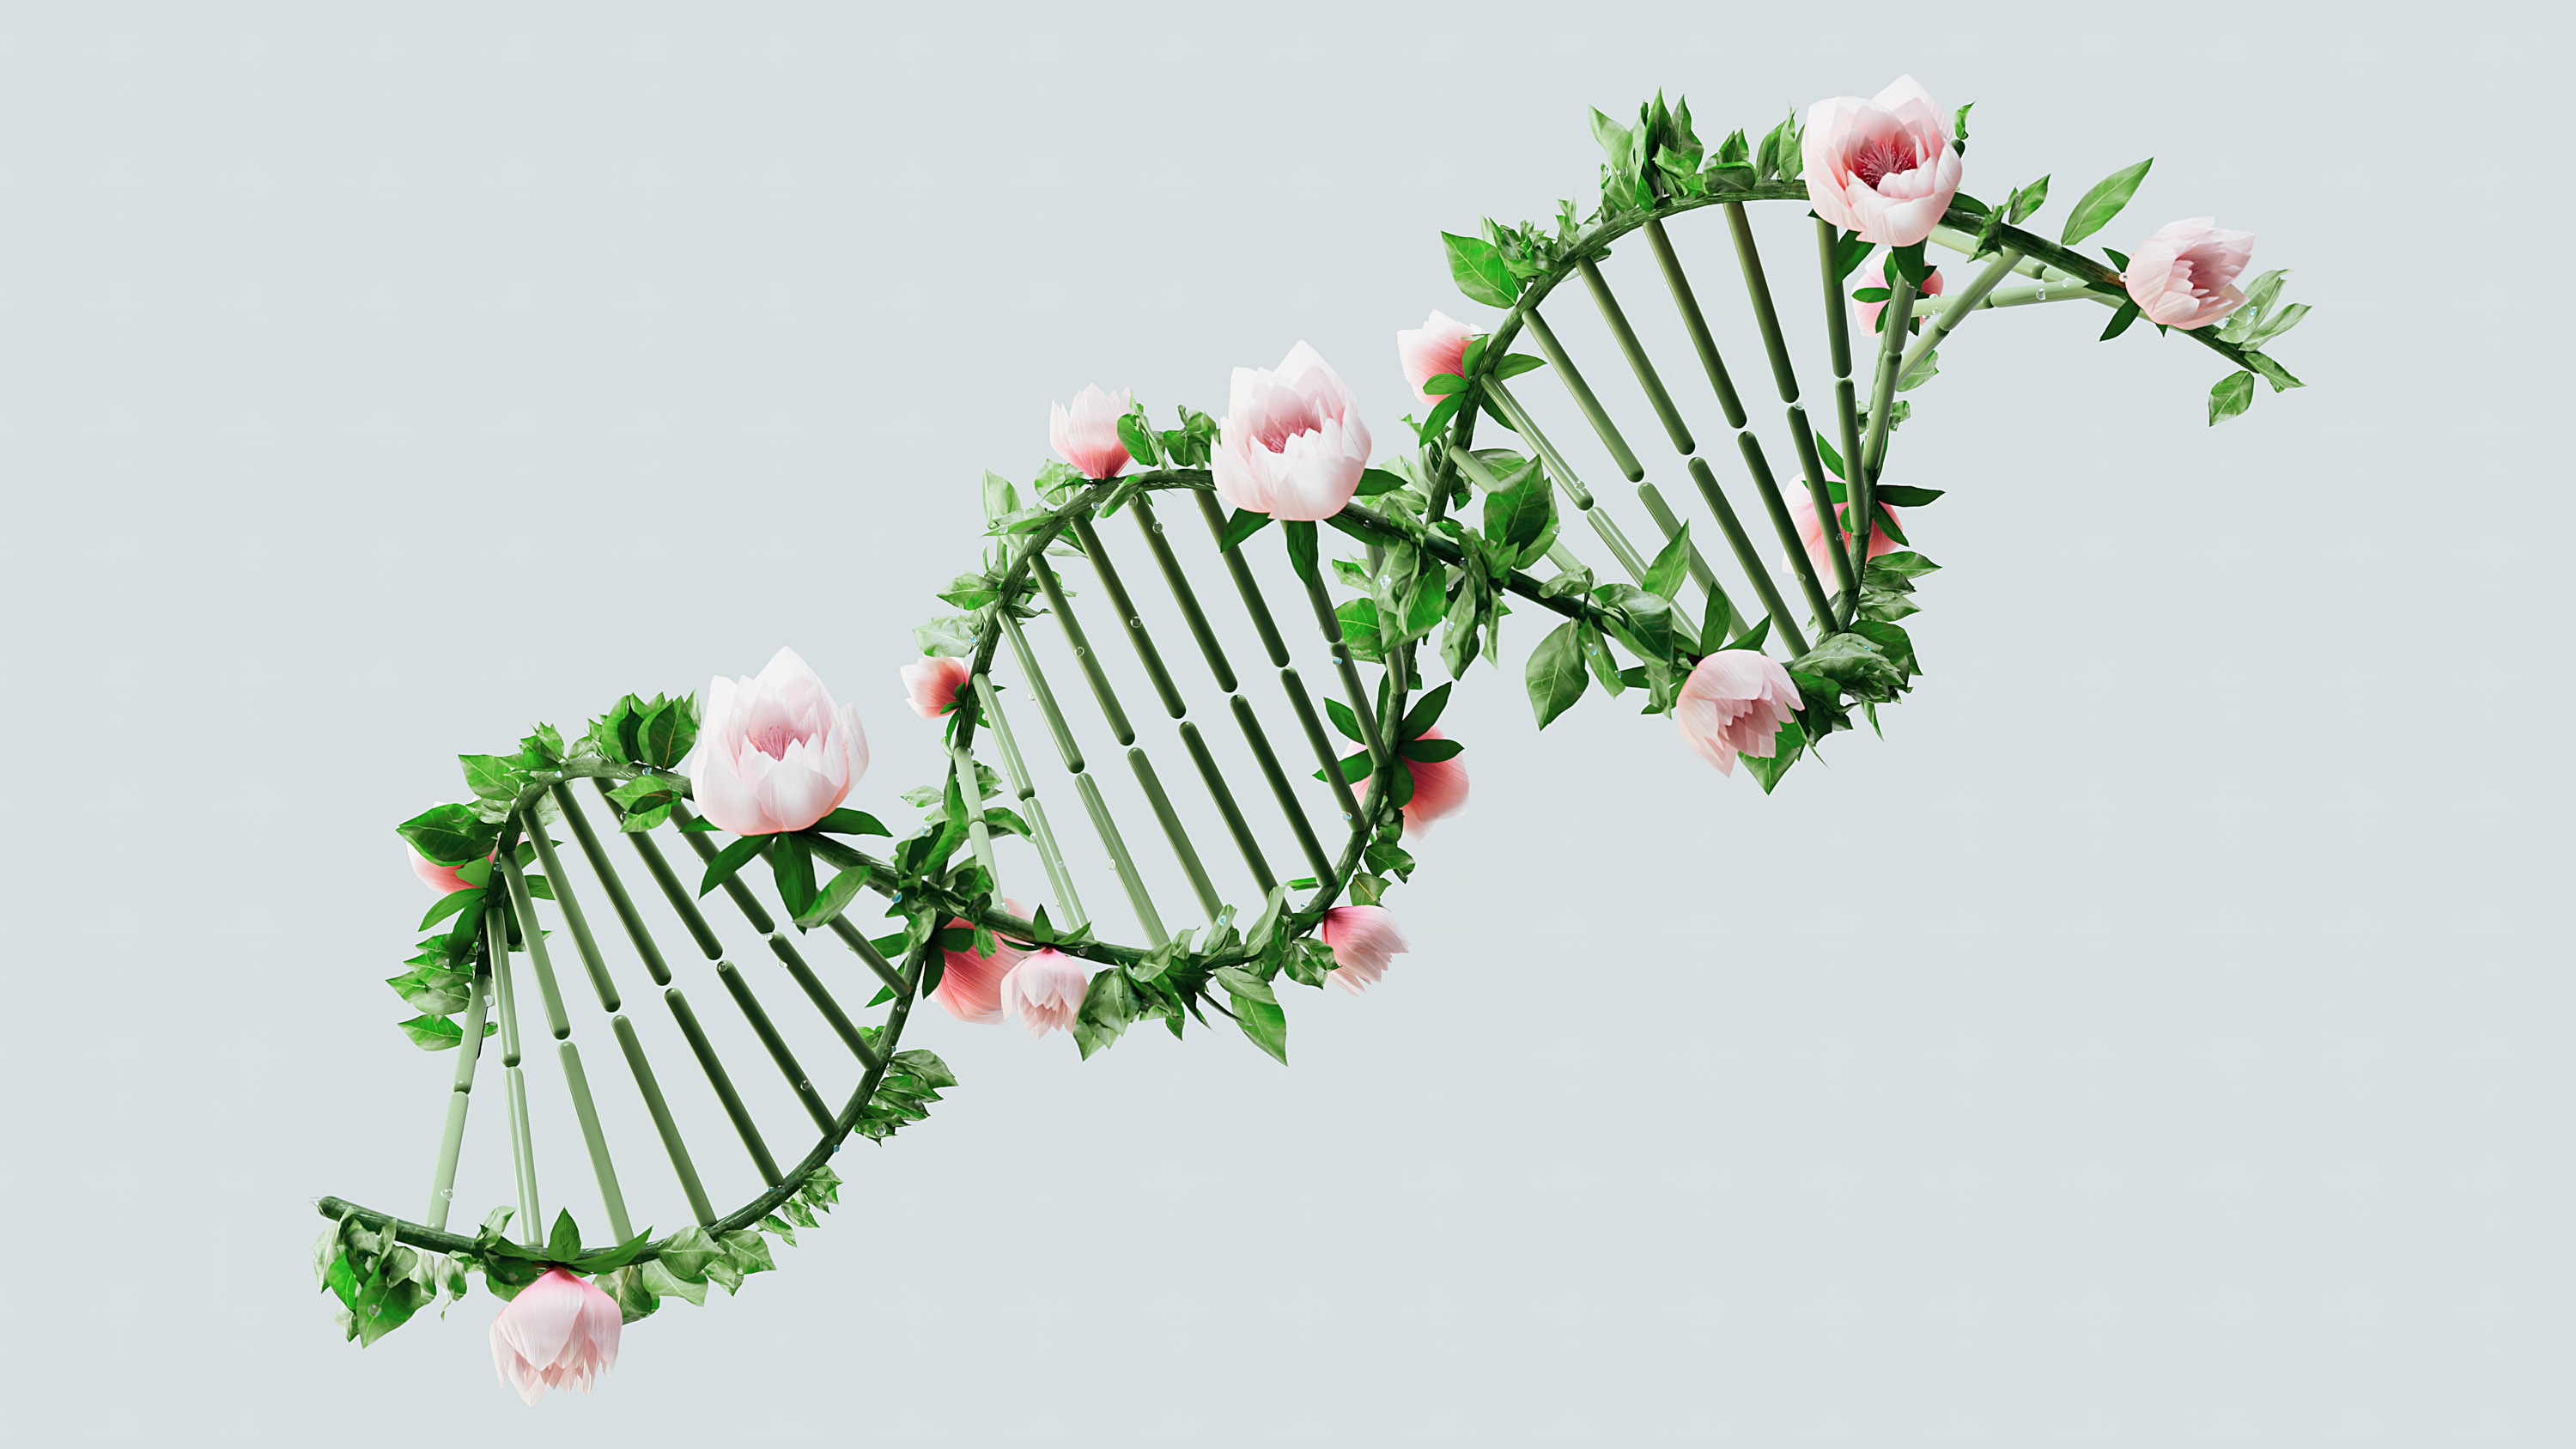 dna helix with leaves and flowers